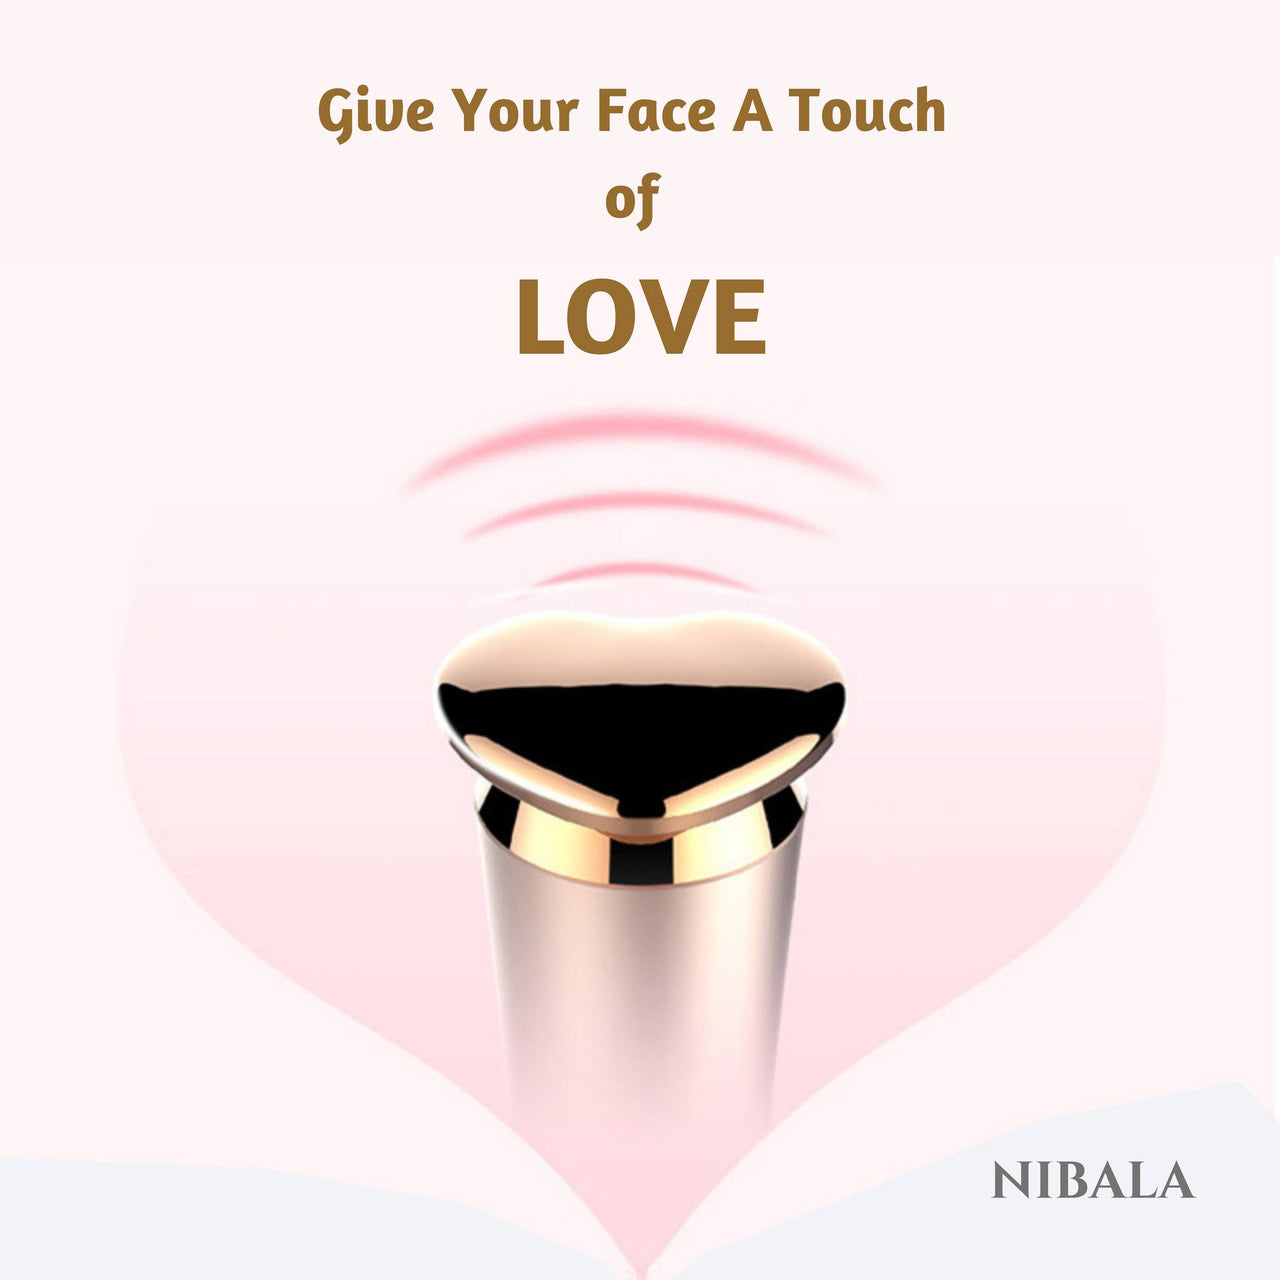 Face lifting massager head with heart shape helps for facial massage